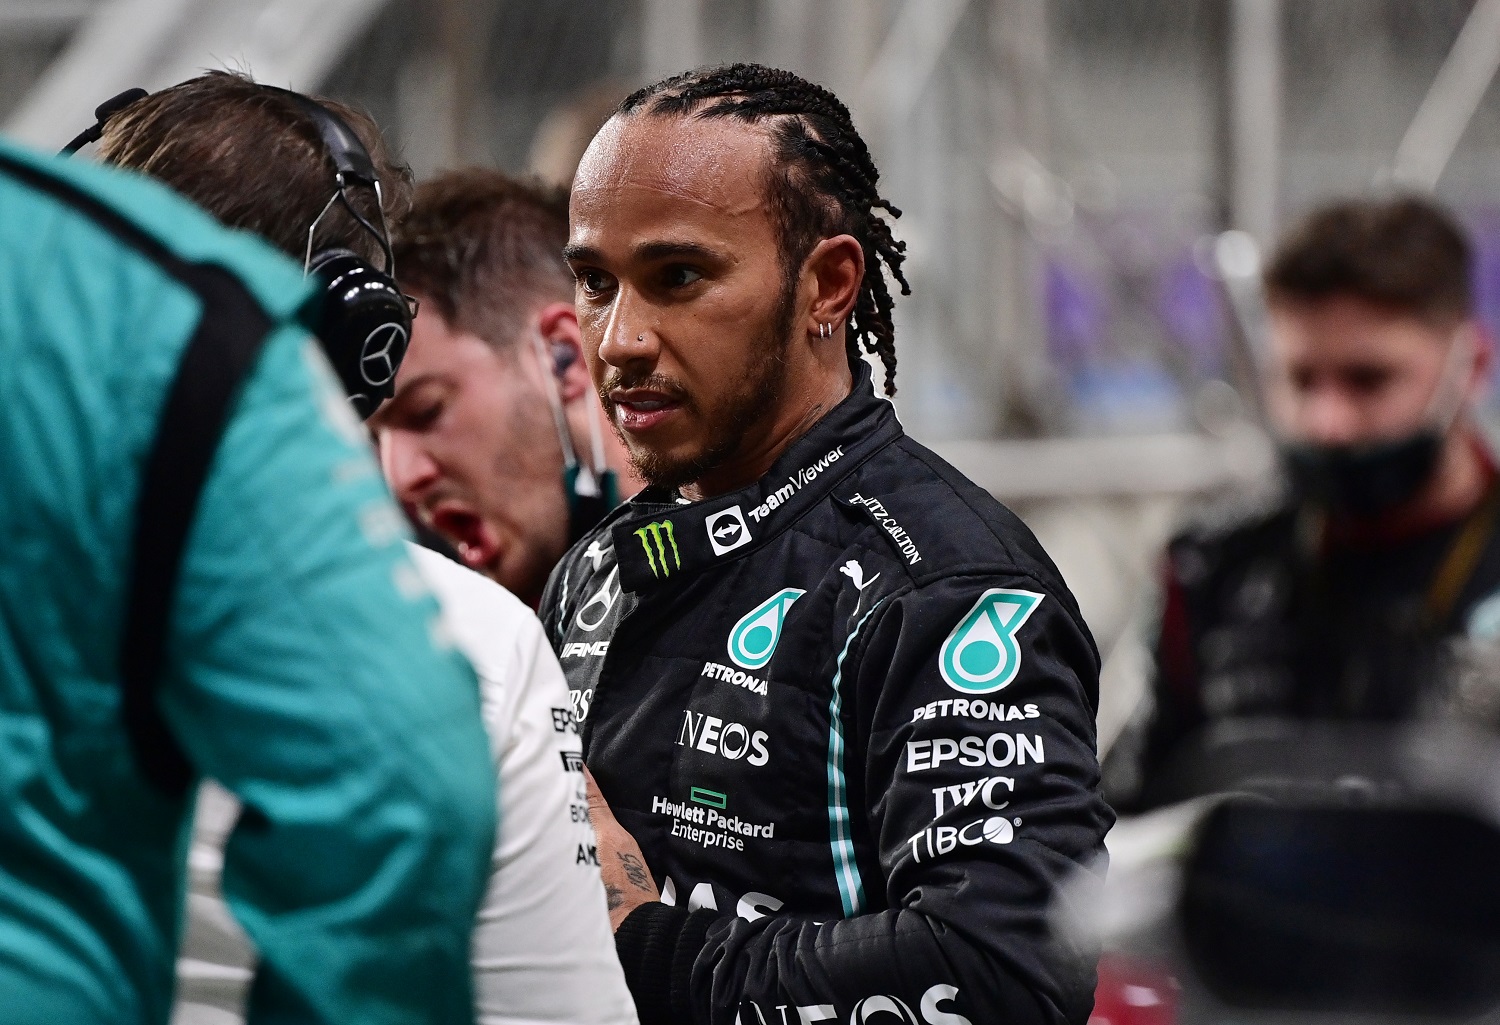 Lewis Hamilton of Great Britain and Mercedes needs to finish in the top 10 and ahead of Max Verstappen at the Abu Dhabi Grand Prix to secure his eighth World Drivers' Championship. | Andrej Isakovic - Pool/Getty Images